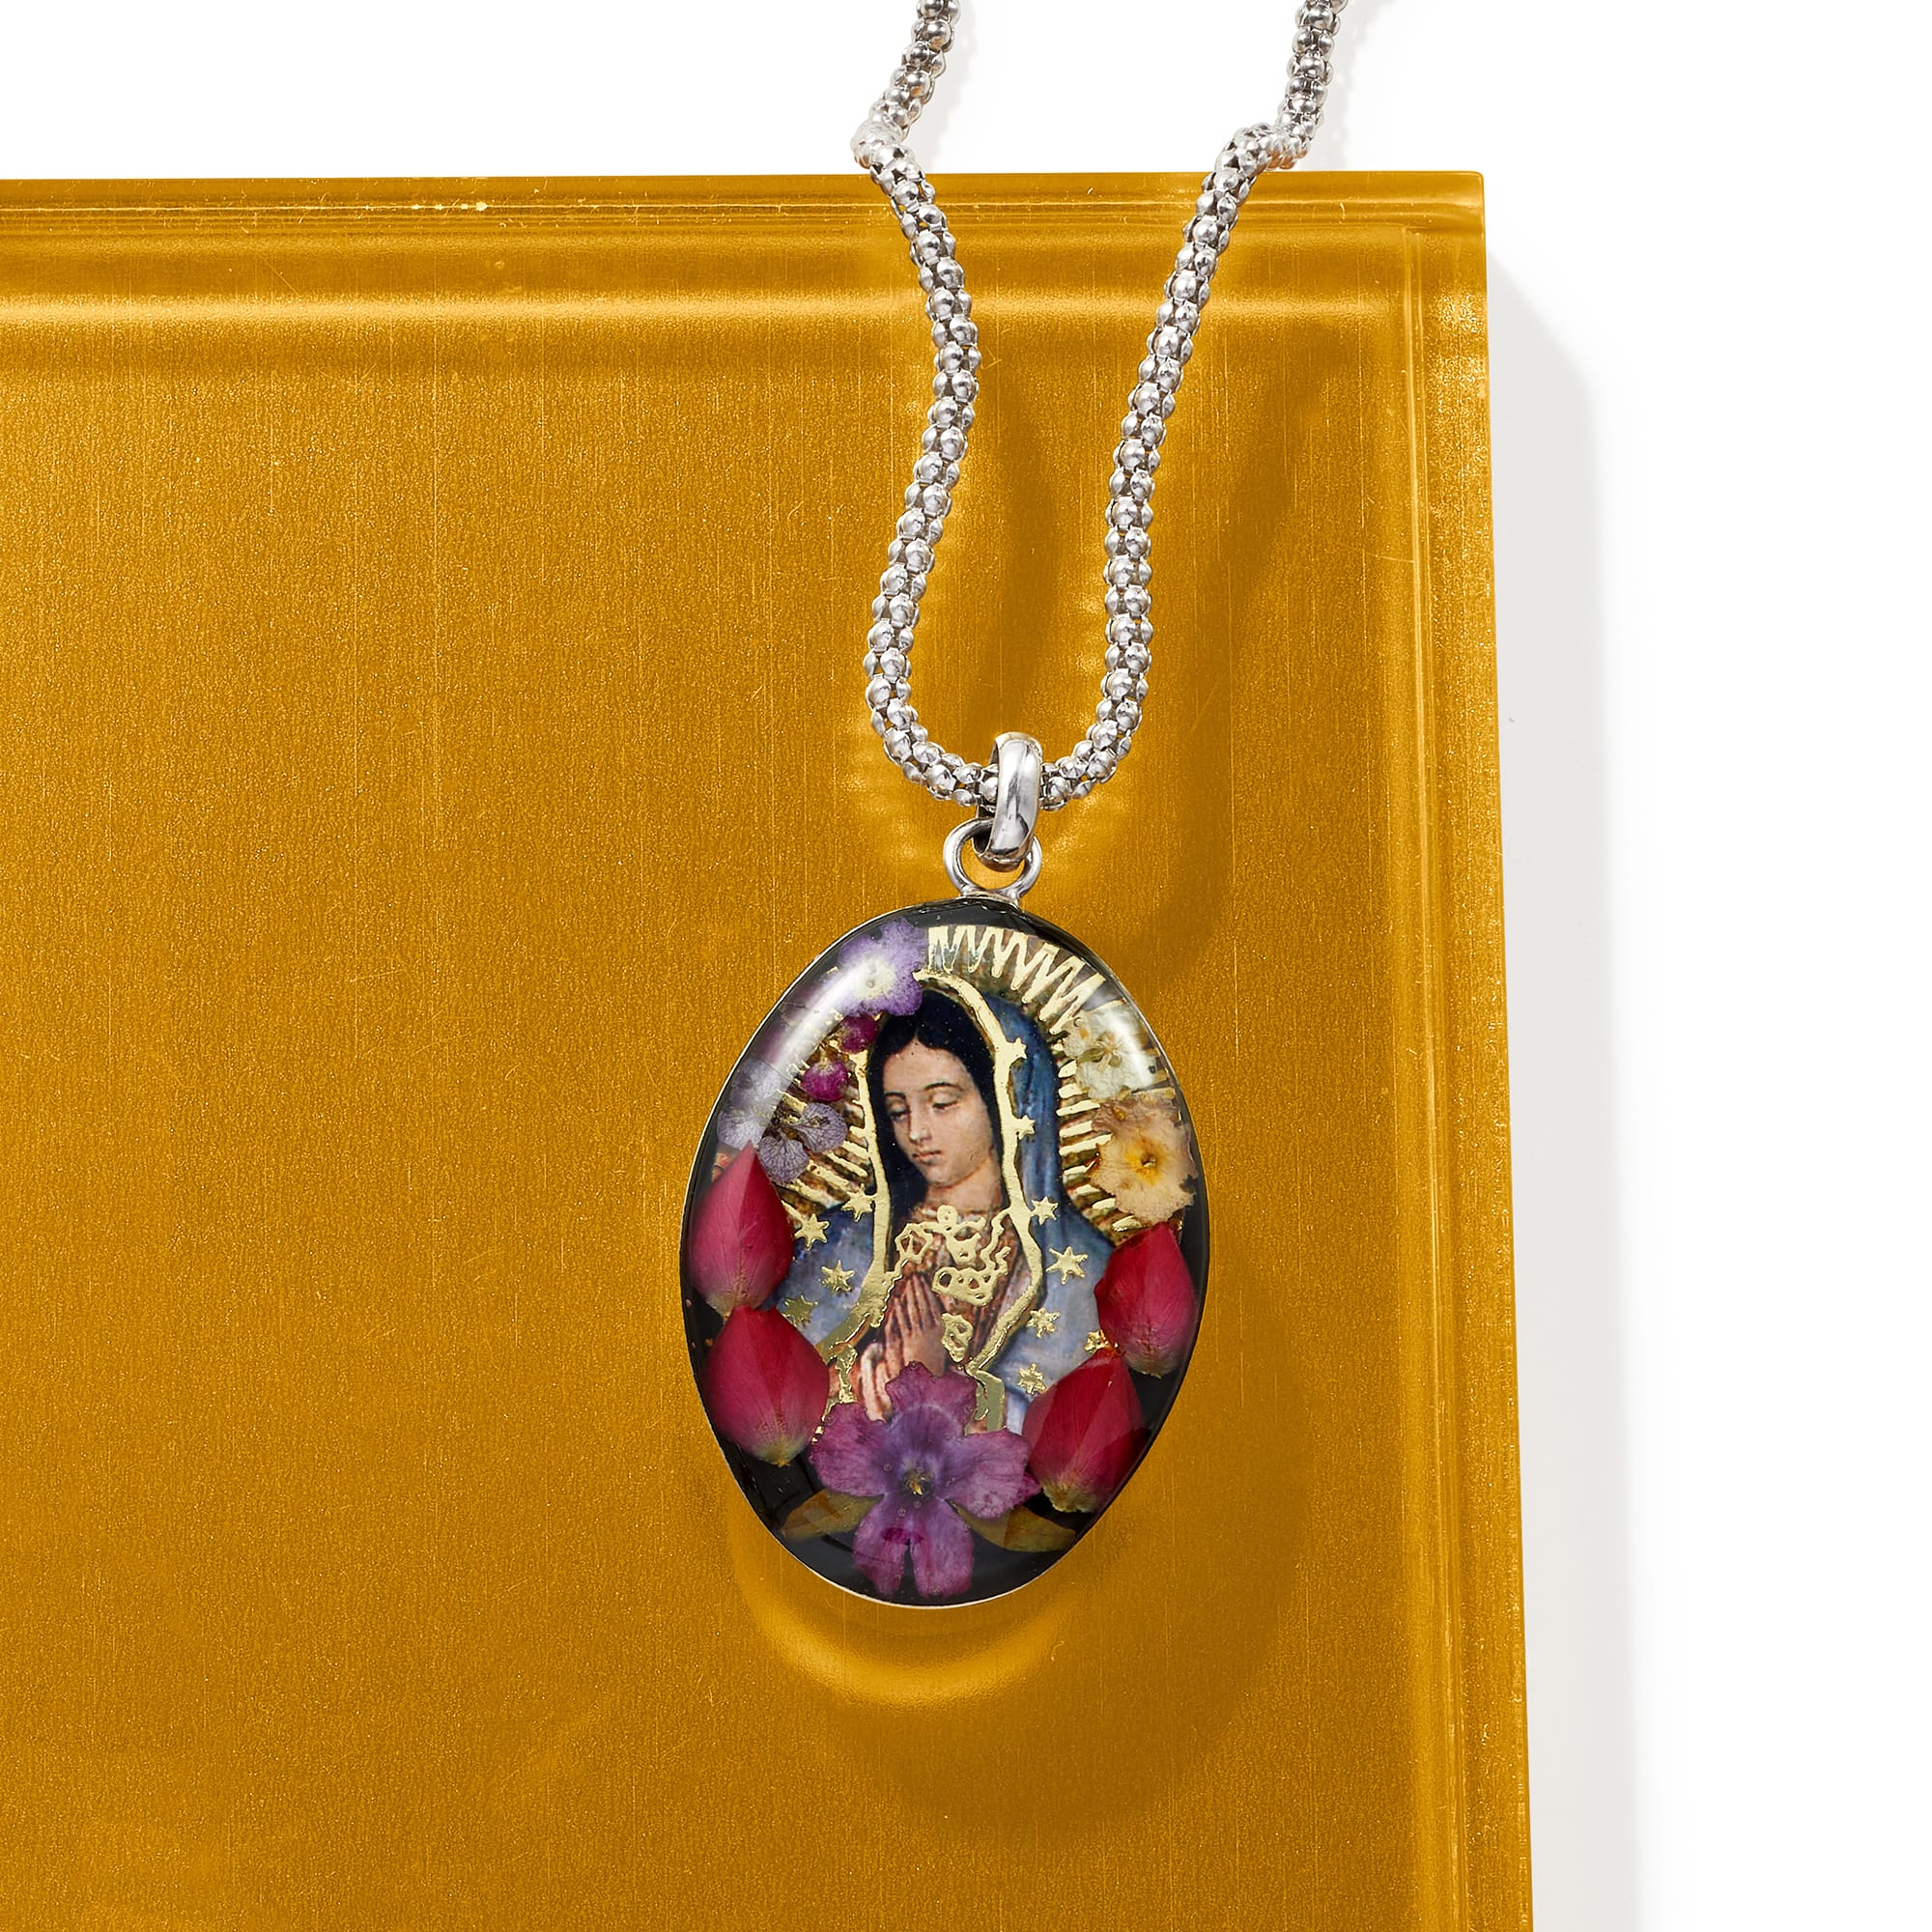 Birthstone Our Lady of Guadalupe Necklace | Livolsi Rosaries